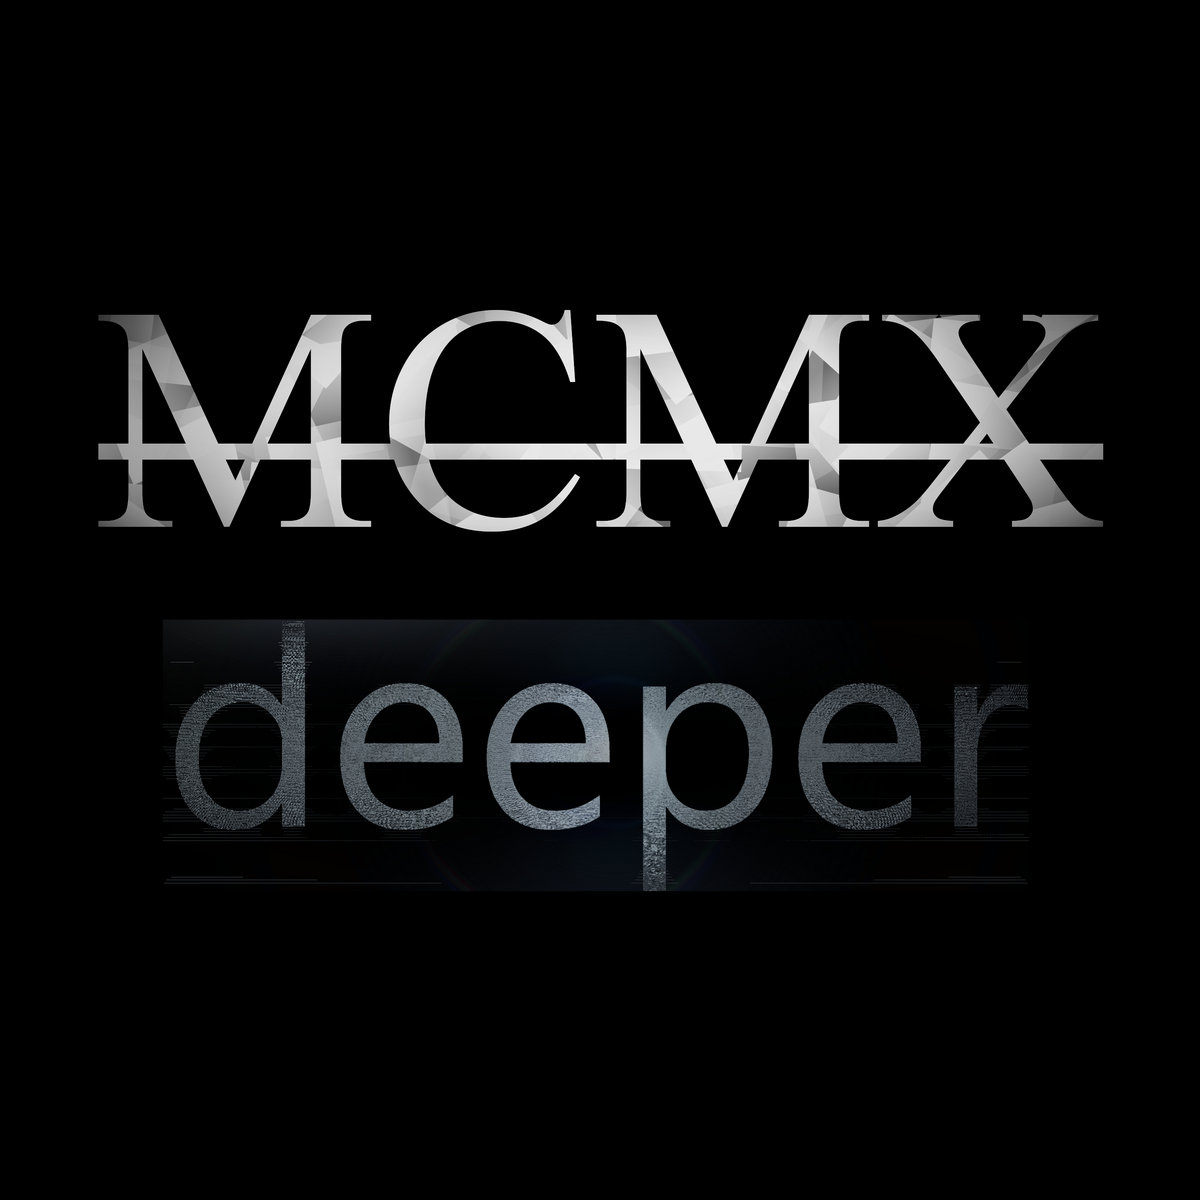 #BandcampFriday #NewMusic MCMX 'Deeper' [ machina-x.bandcamp.com/album/deeper ] ...an exploration of the darker emotions that surround passion... Written/performed/recorded/produced by @montagecollect1/@M_A_C_H_I_N_A_x Bonus track with digital purchase #alternative #electronic #synthpop